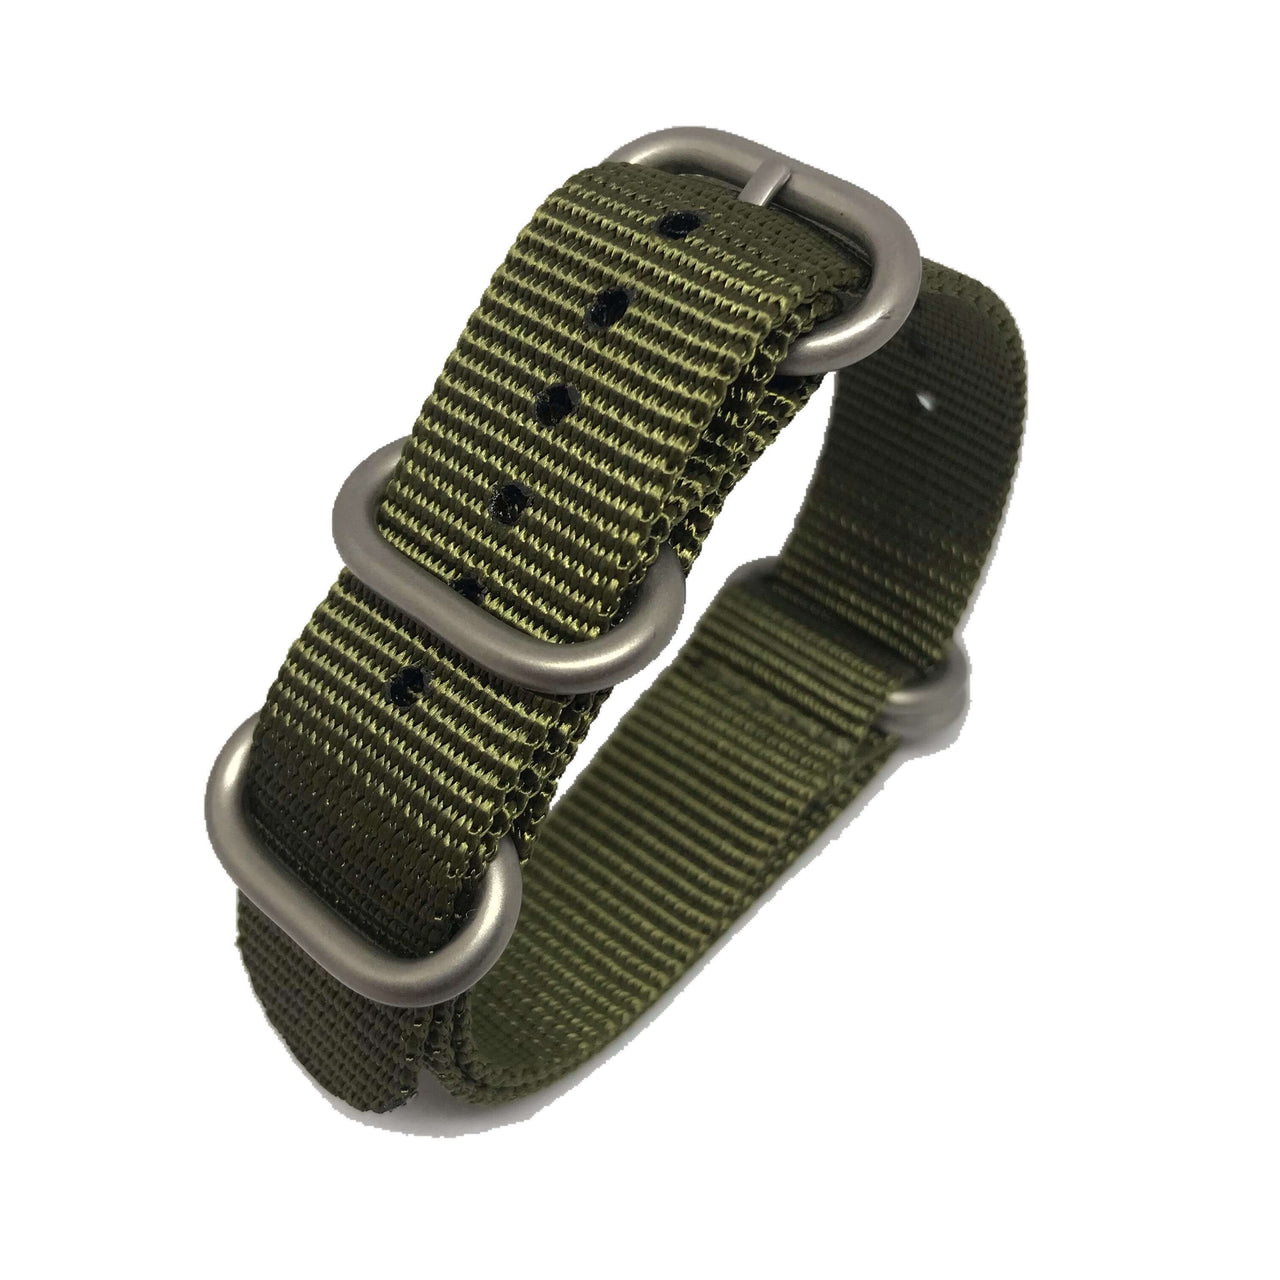 Zulu Military Style Strap - Military Green - Silver Buckle